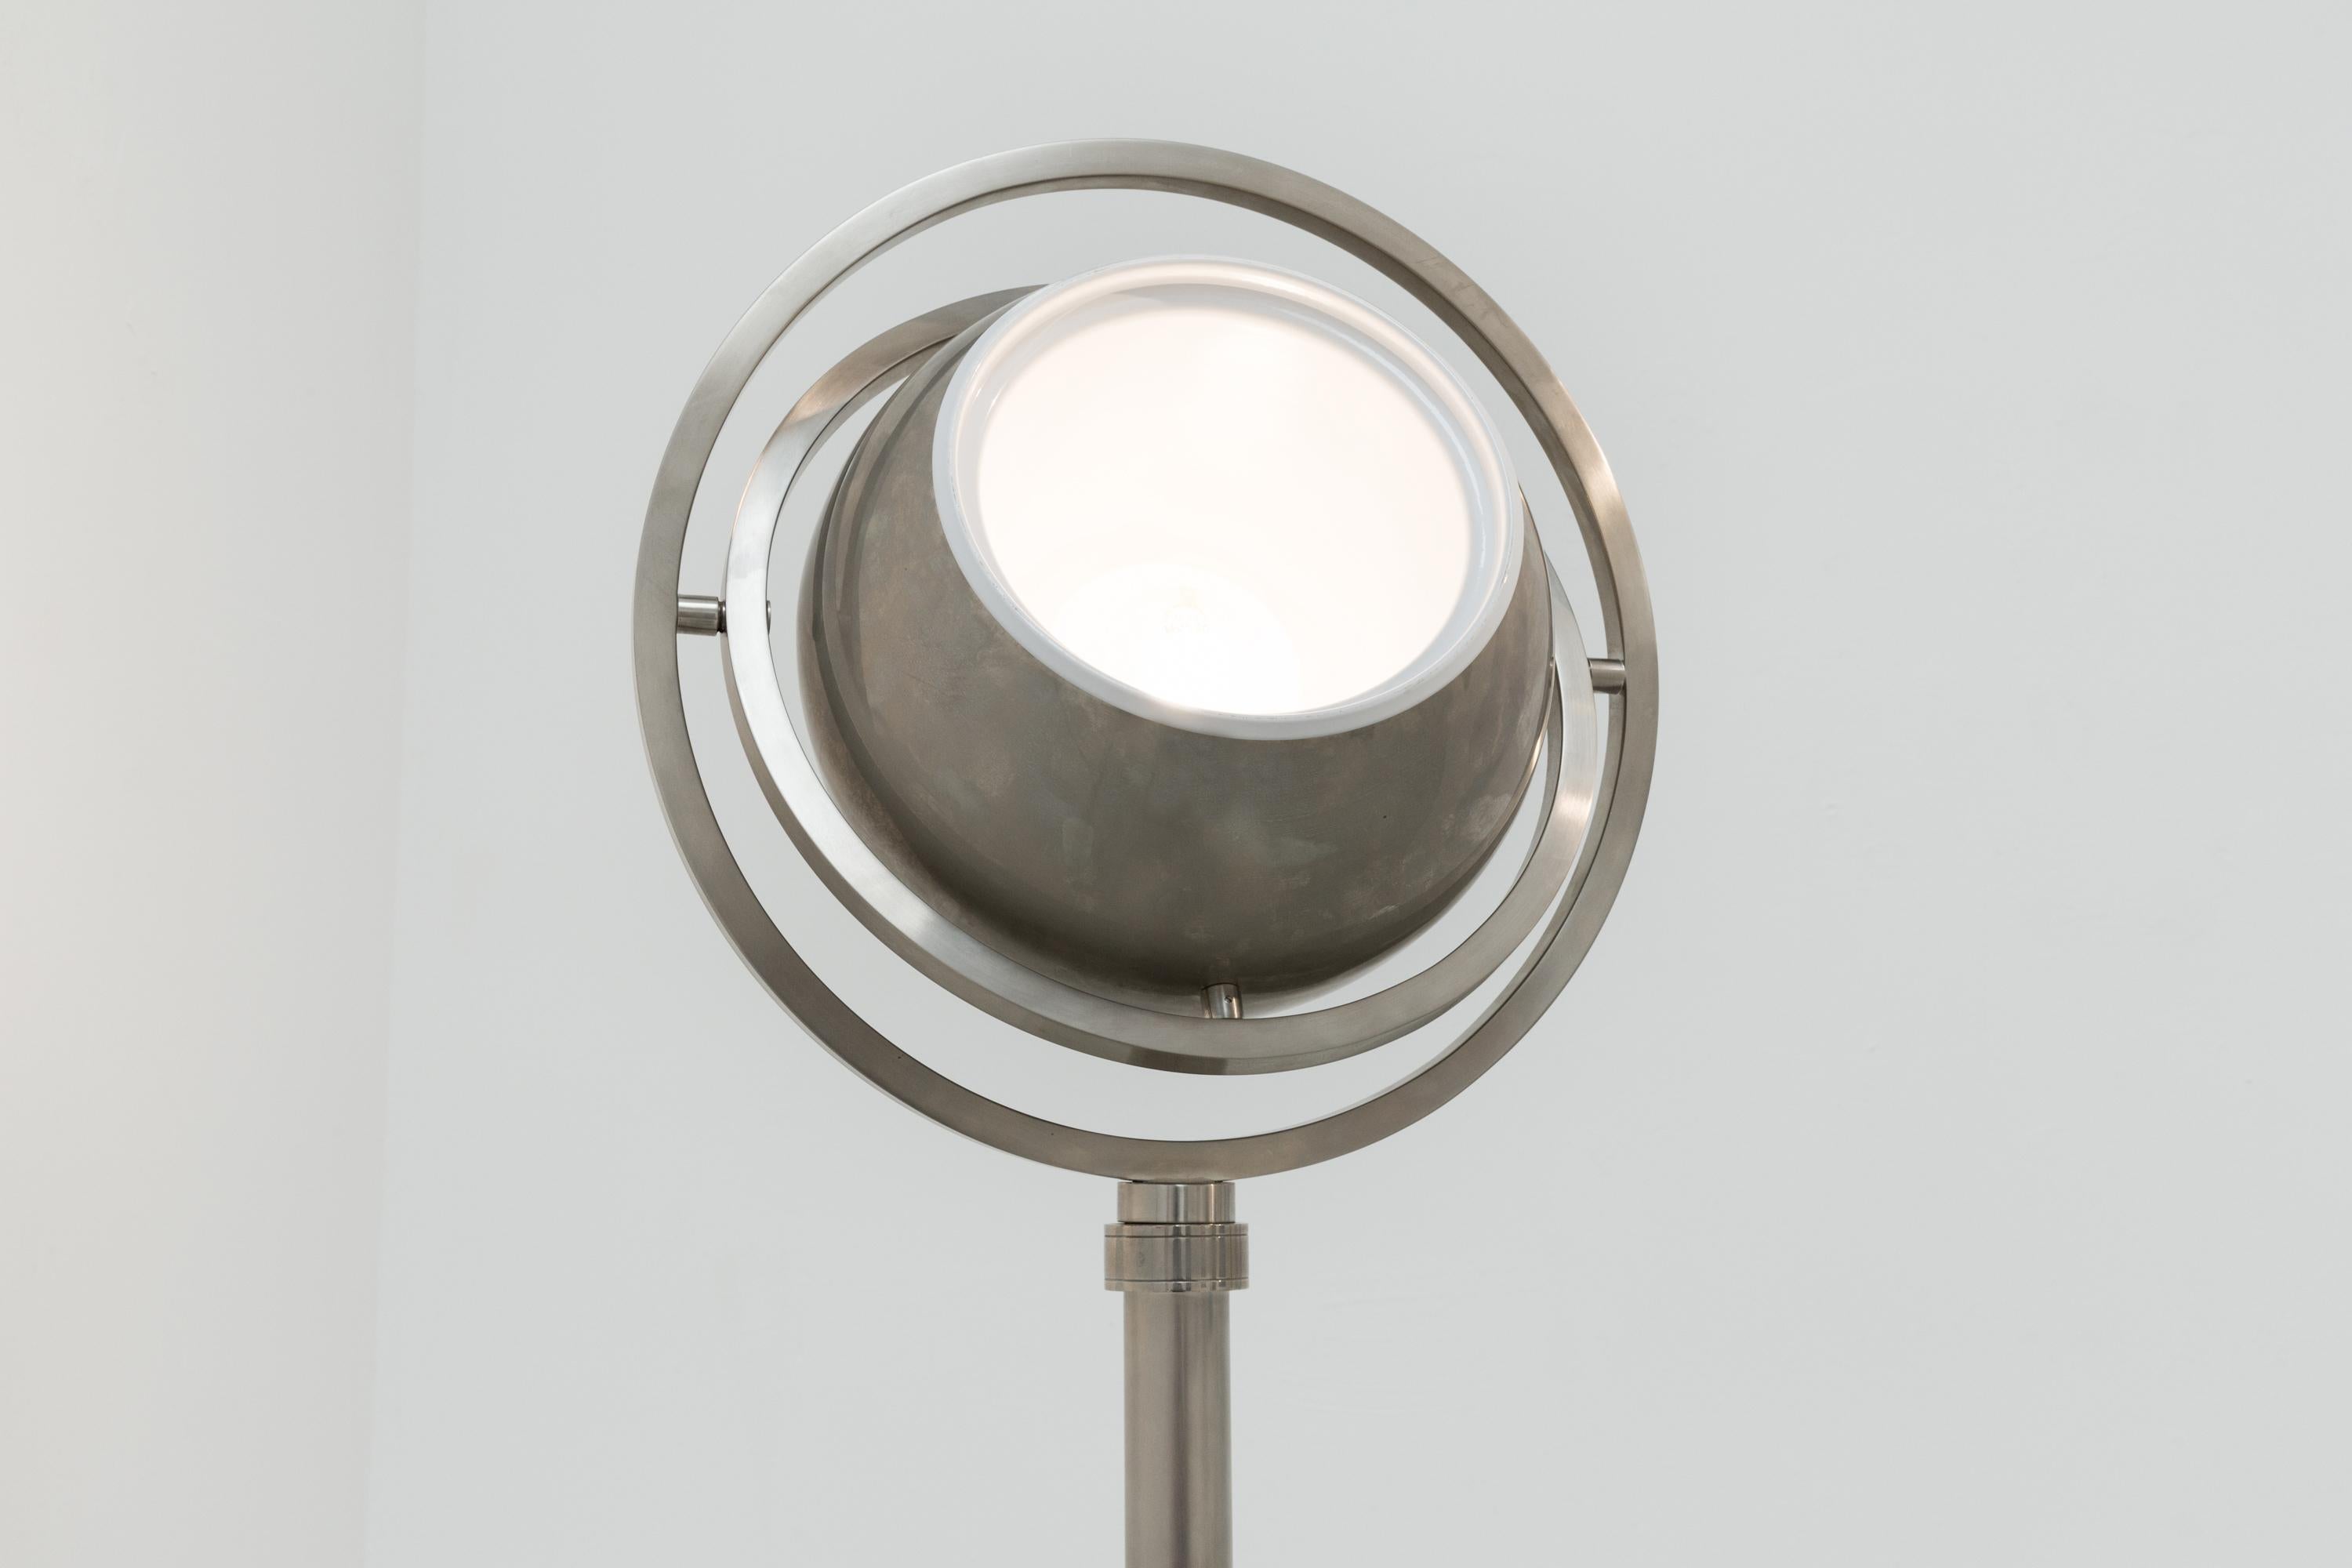 A floor lamp by Charles Martin, nickeled metal. One floodlight that can be turned in many directions. Production and year unknown.